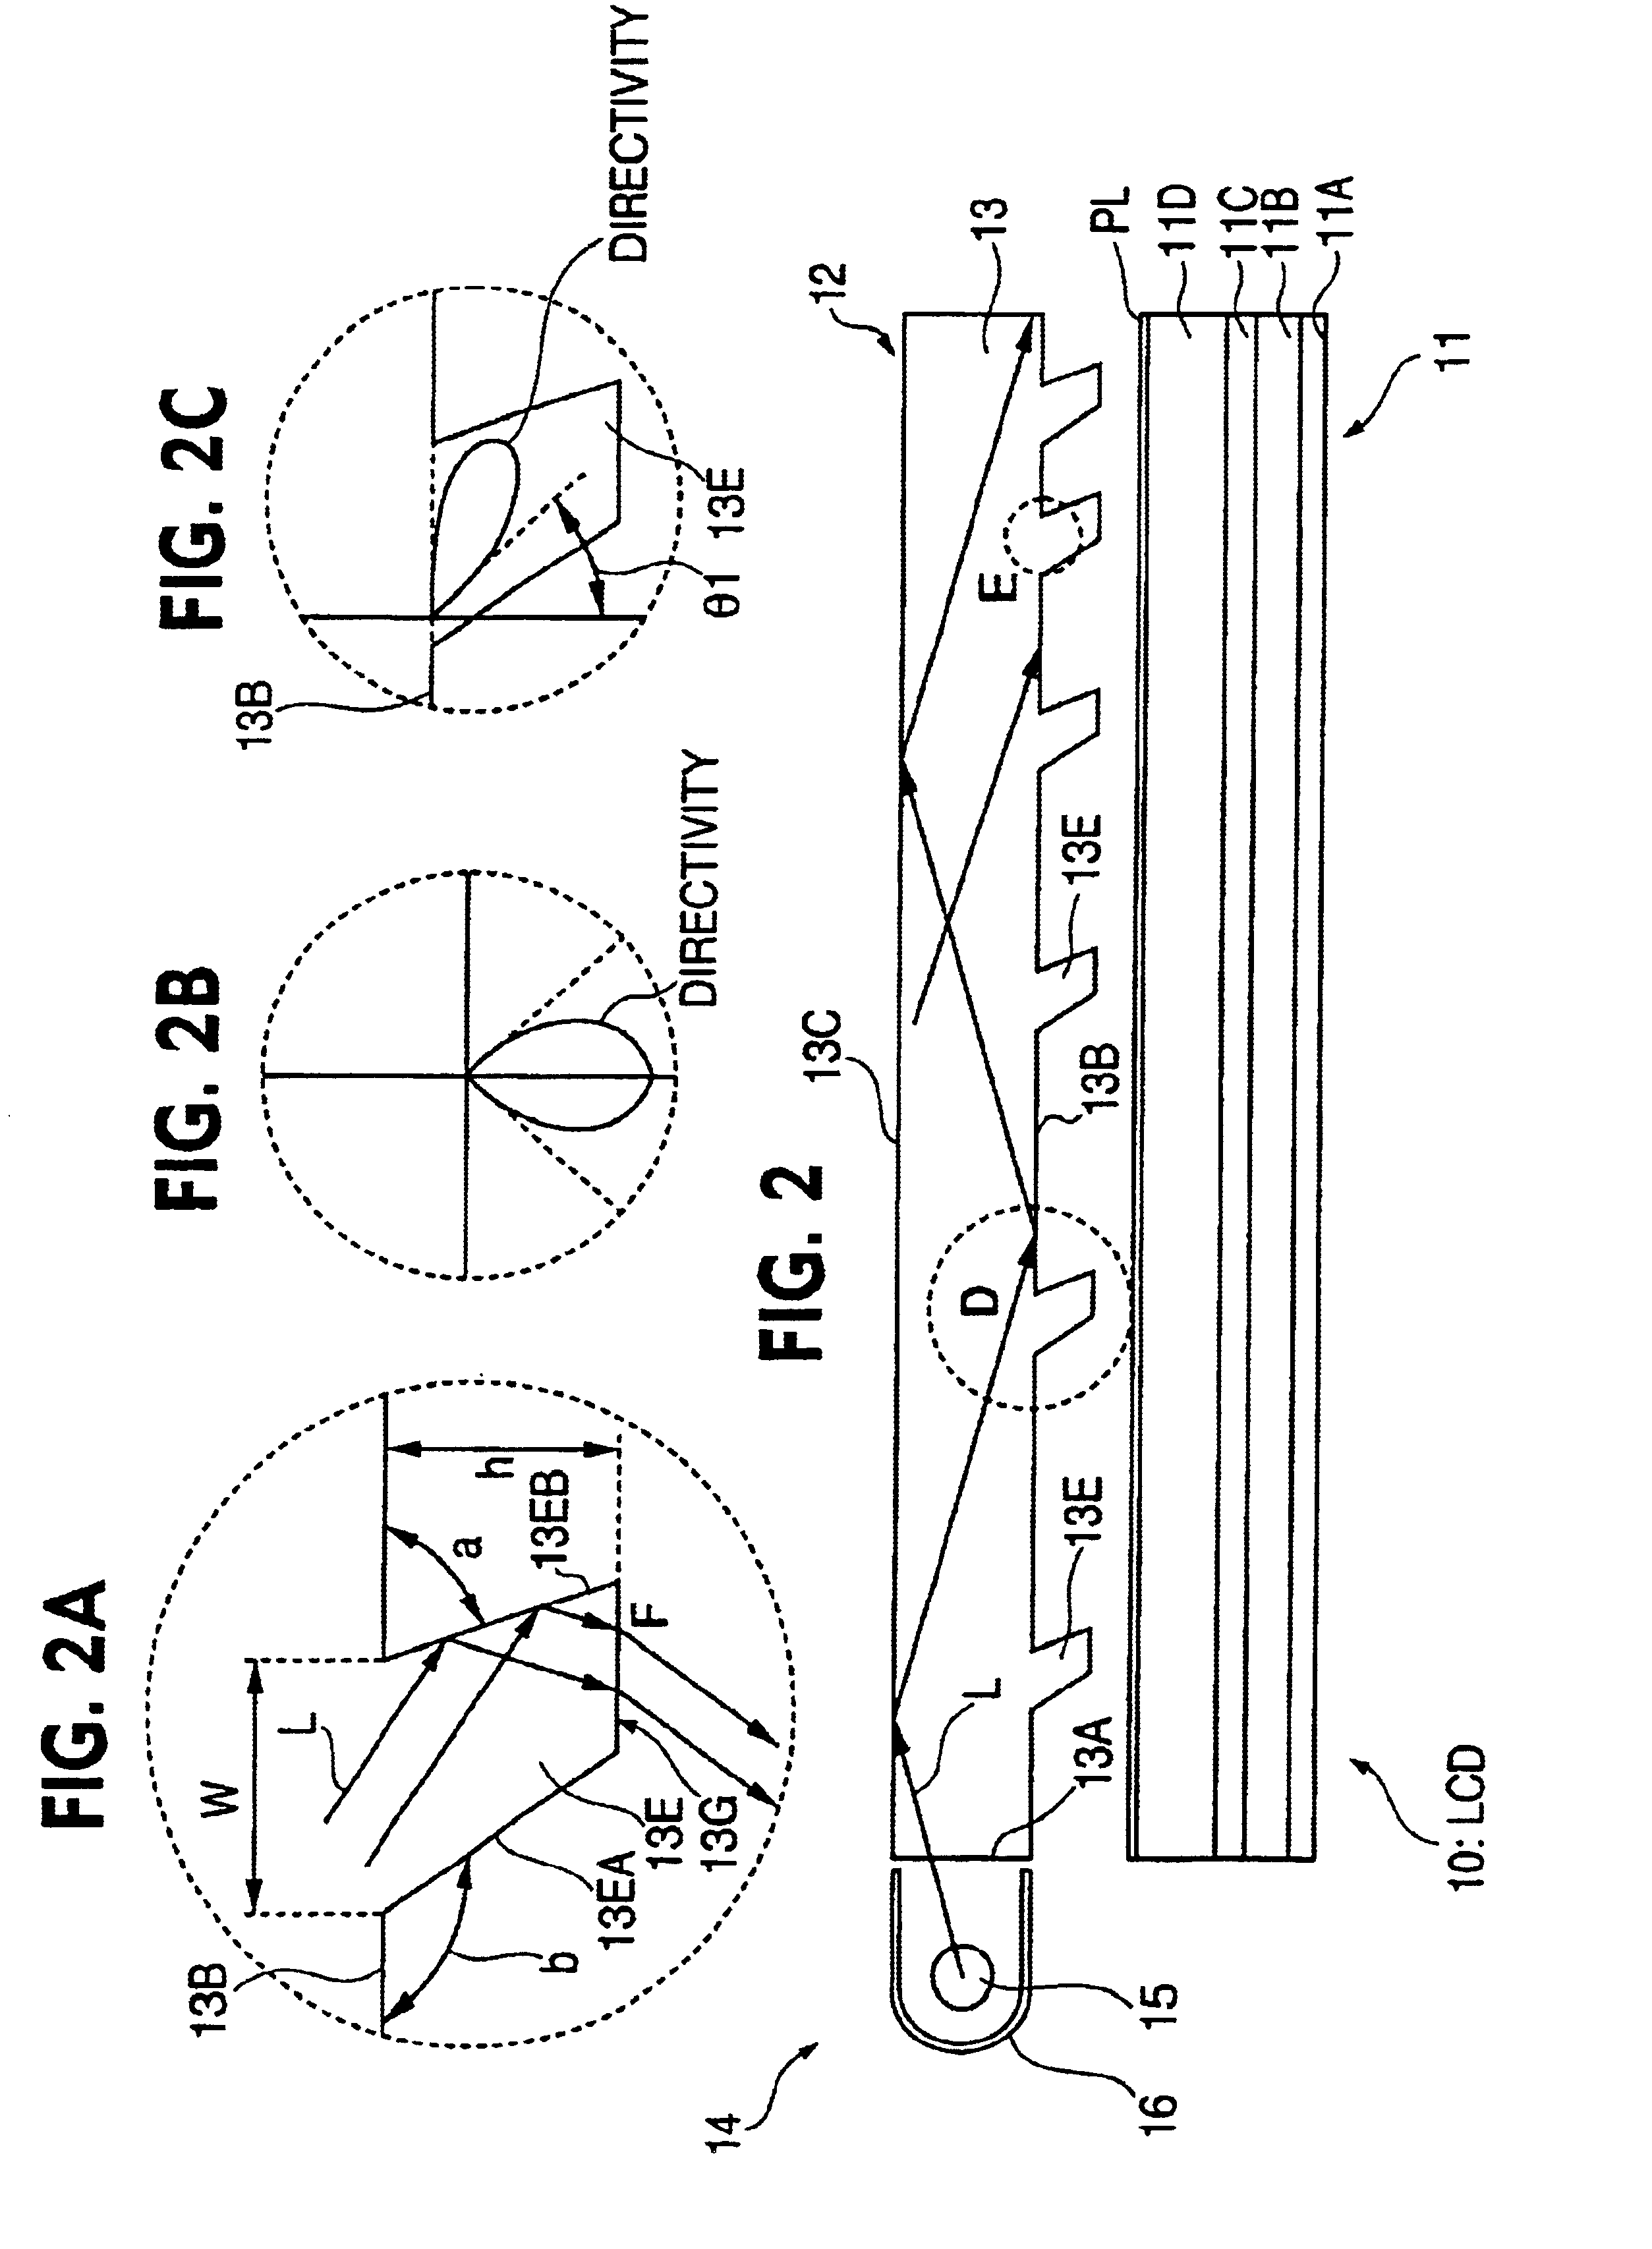 Guide plate, surface light source device of side light type and liquid crystal display